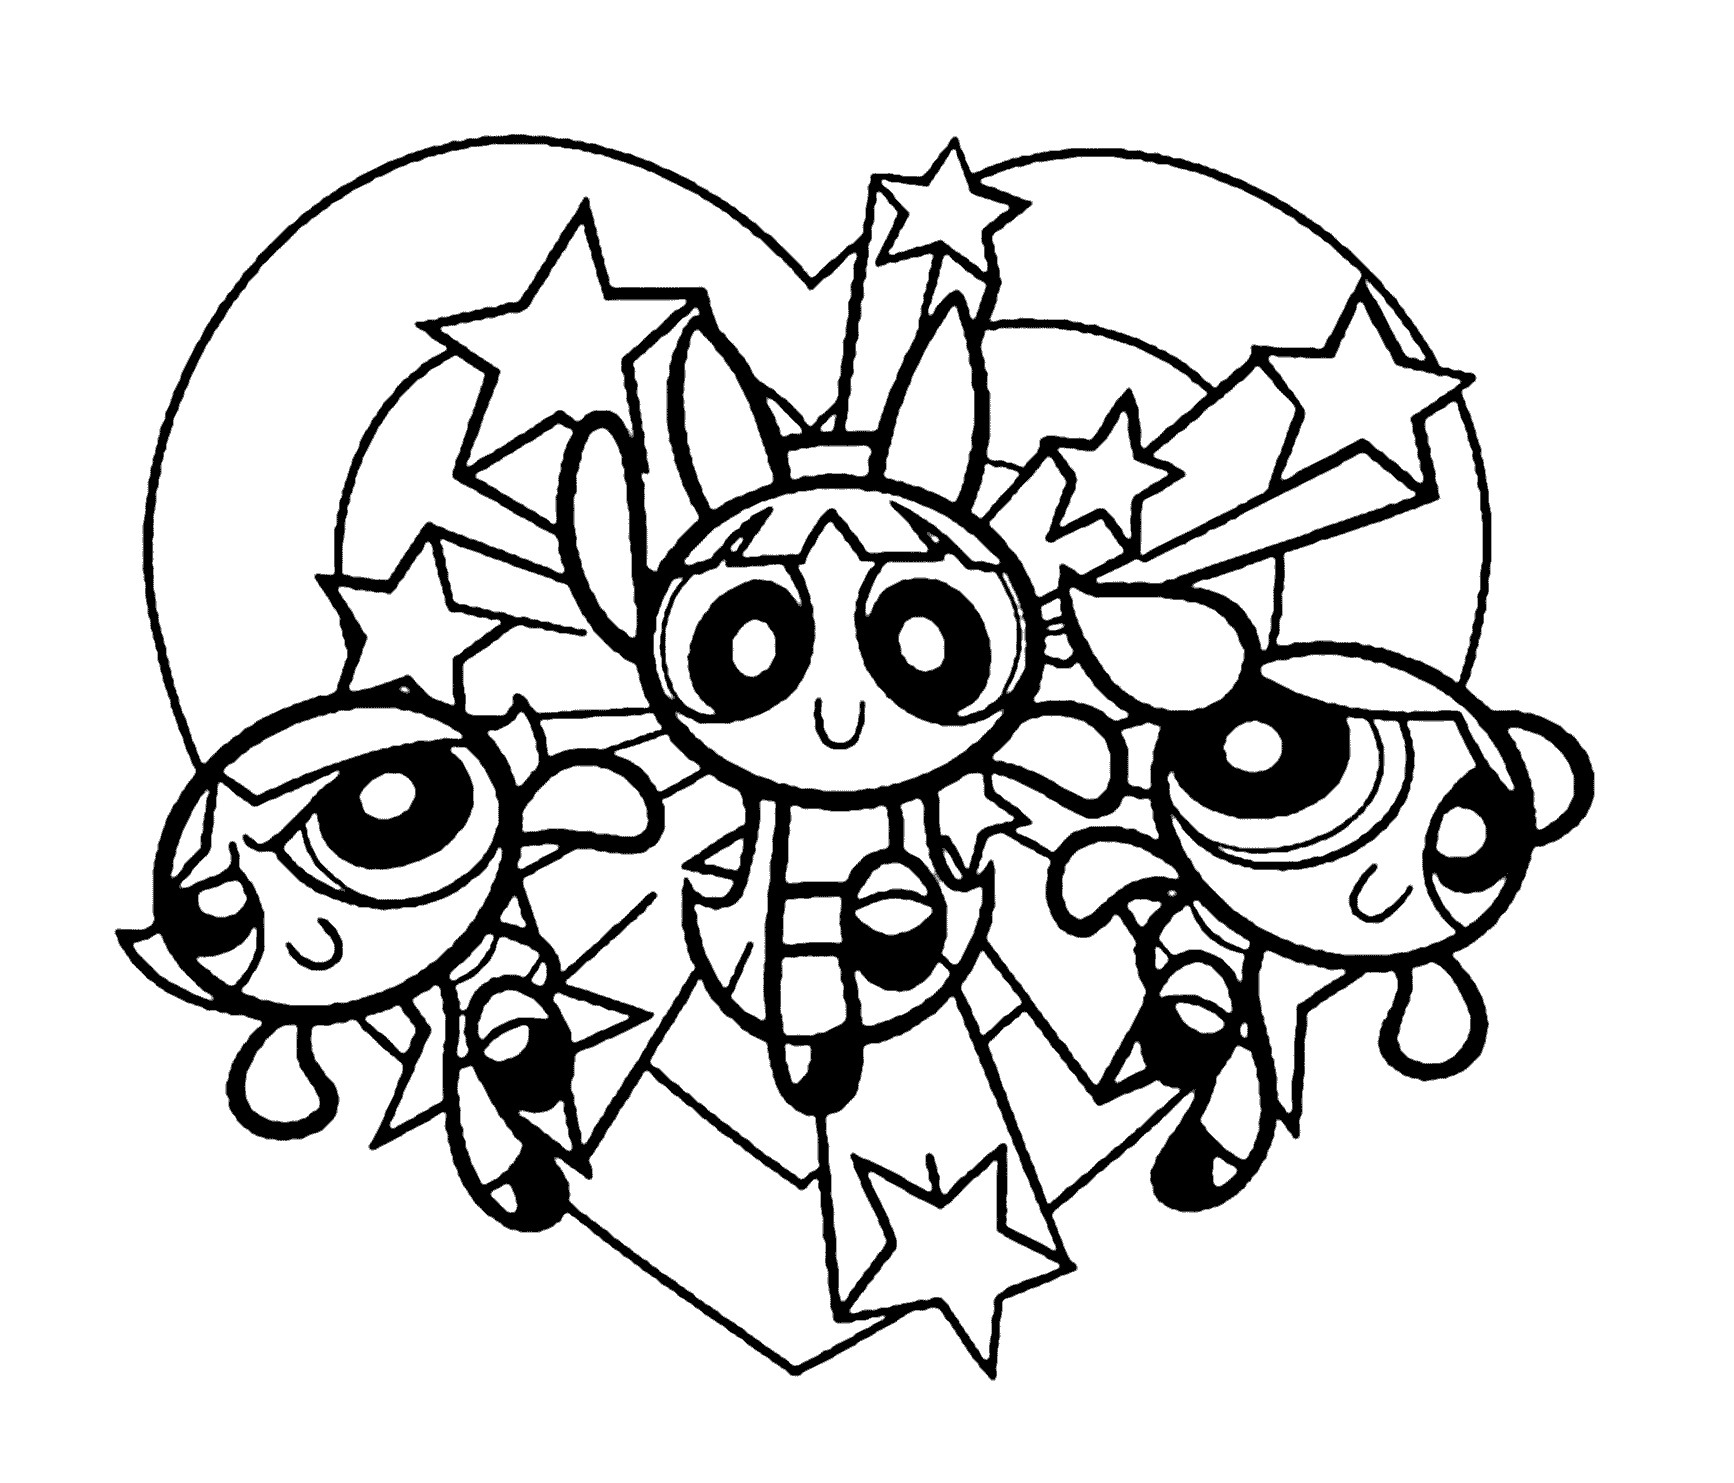 Power Puff Girls Coloring Sheets
 12 printable pictures of powerpuff girls page Print